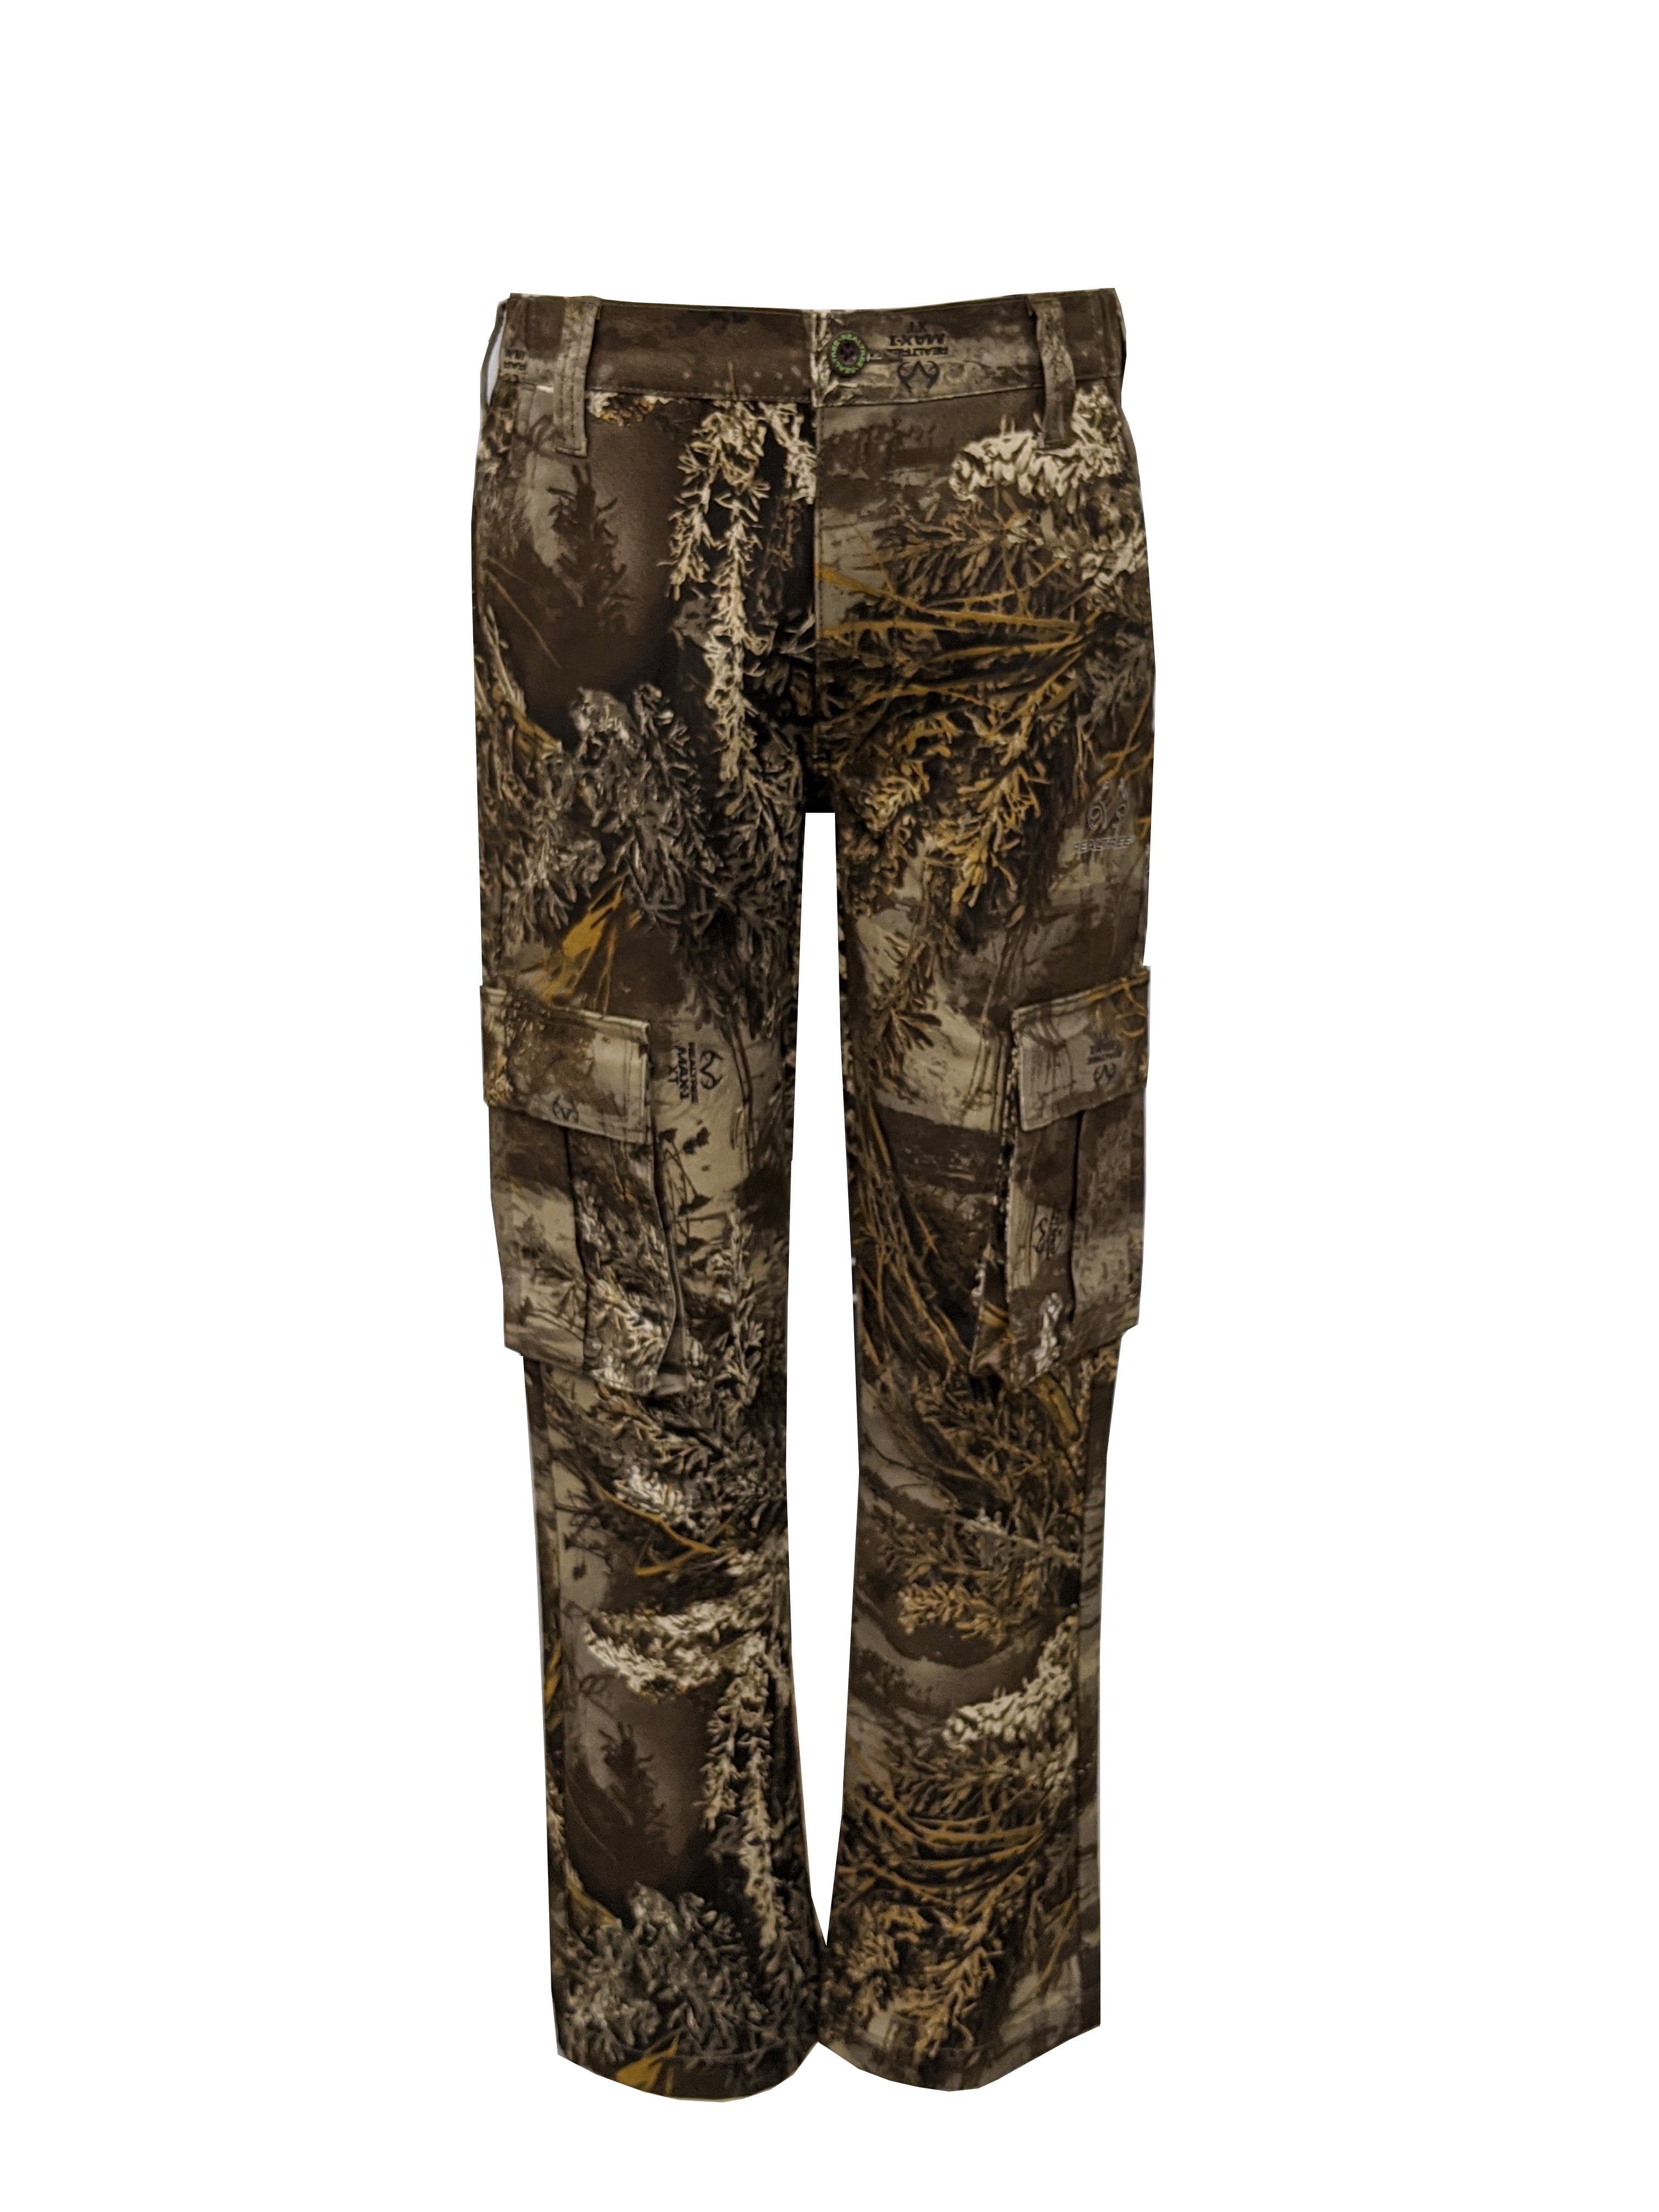 Realtree MAX-1XT Youth Cargo Pant in 